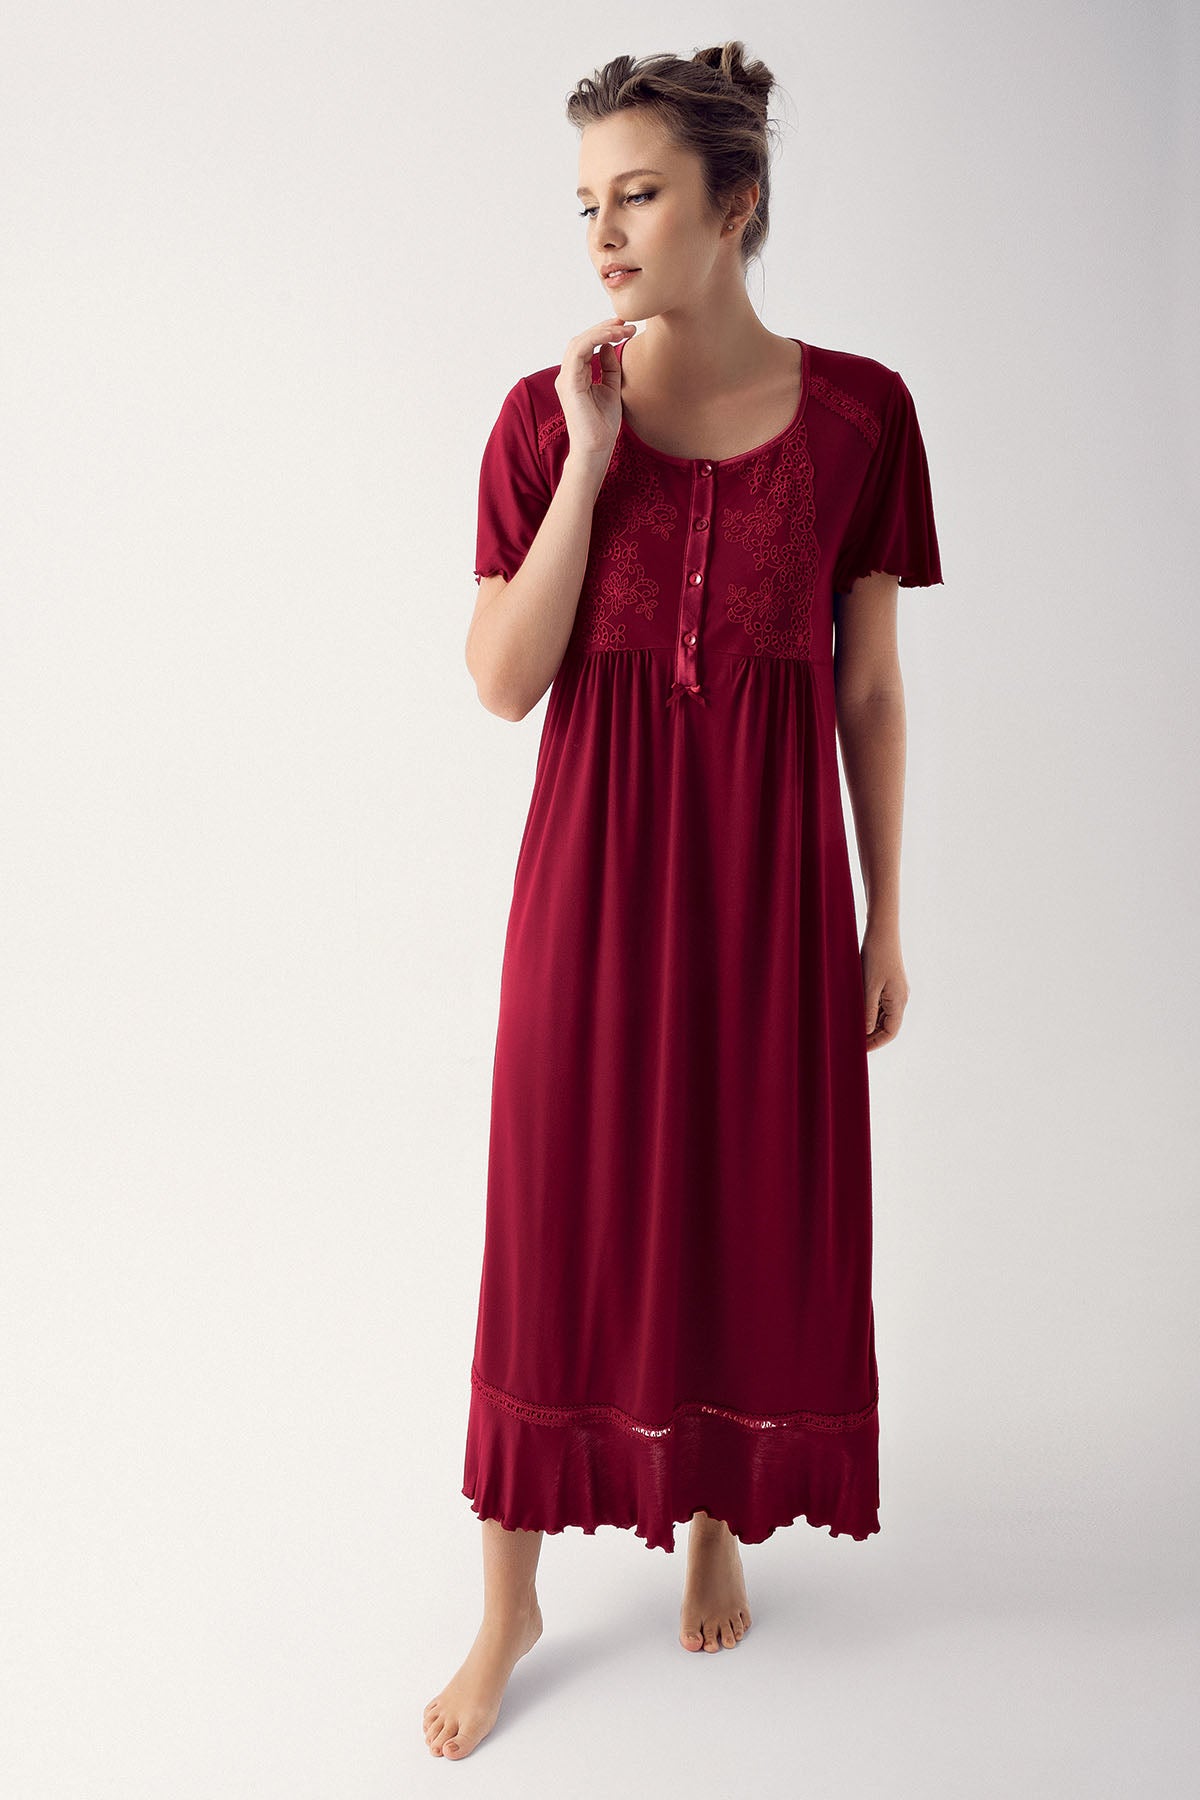 Shopymommy 14101 Collar And Skirt Detail Maternity & Nursing Nightgown Claret Red